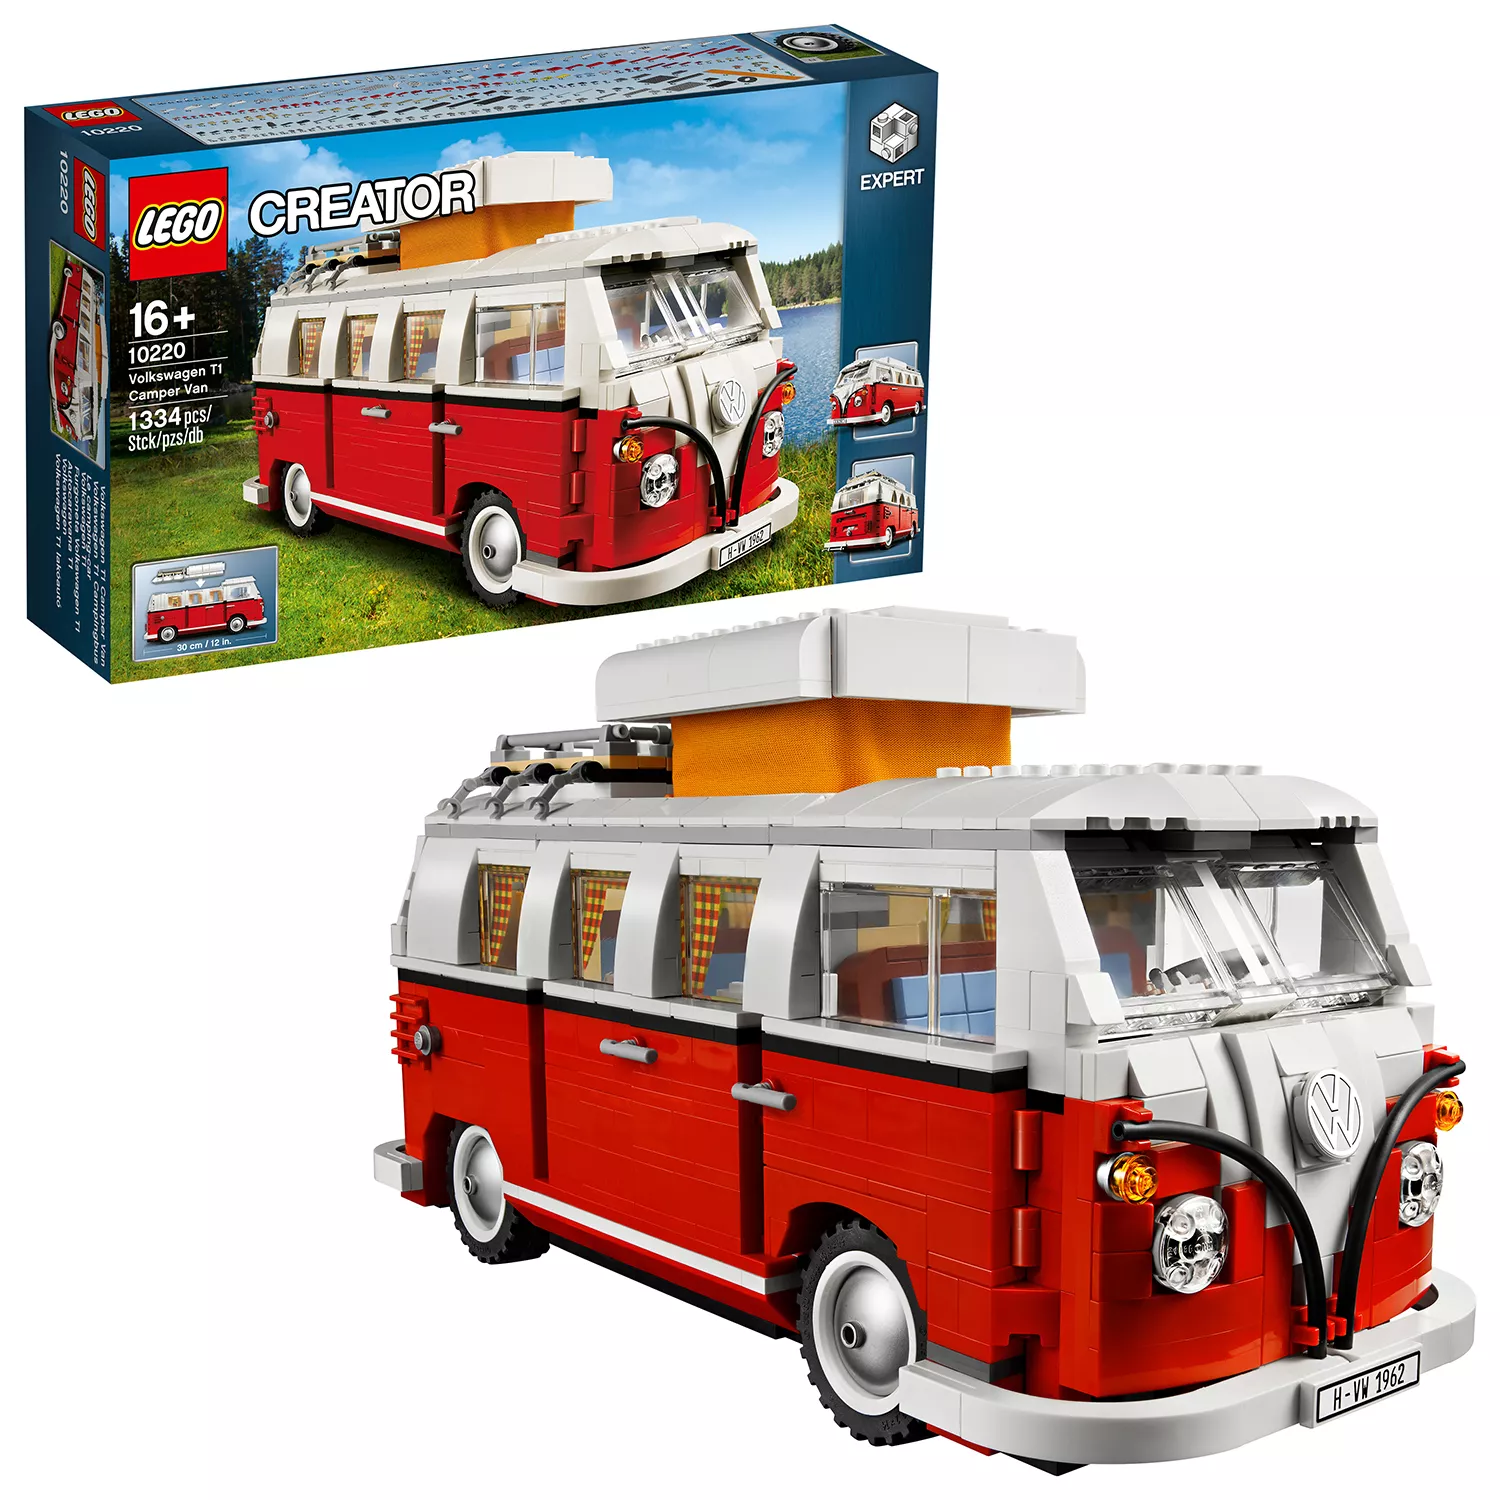 LEGO Hard to Find Items Volkswagen T1 Campingbus - 10220